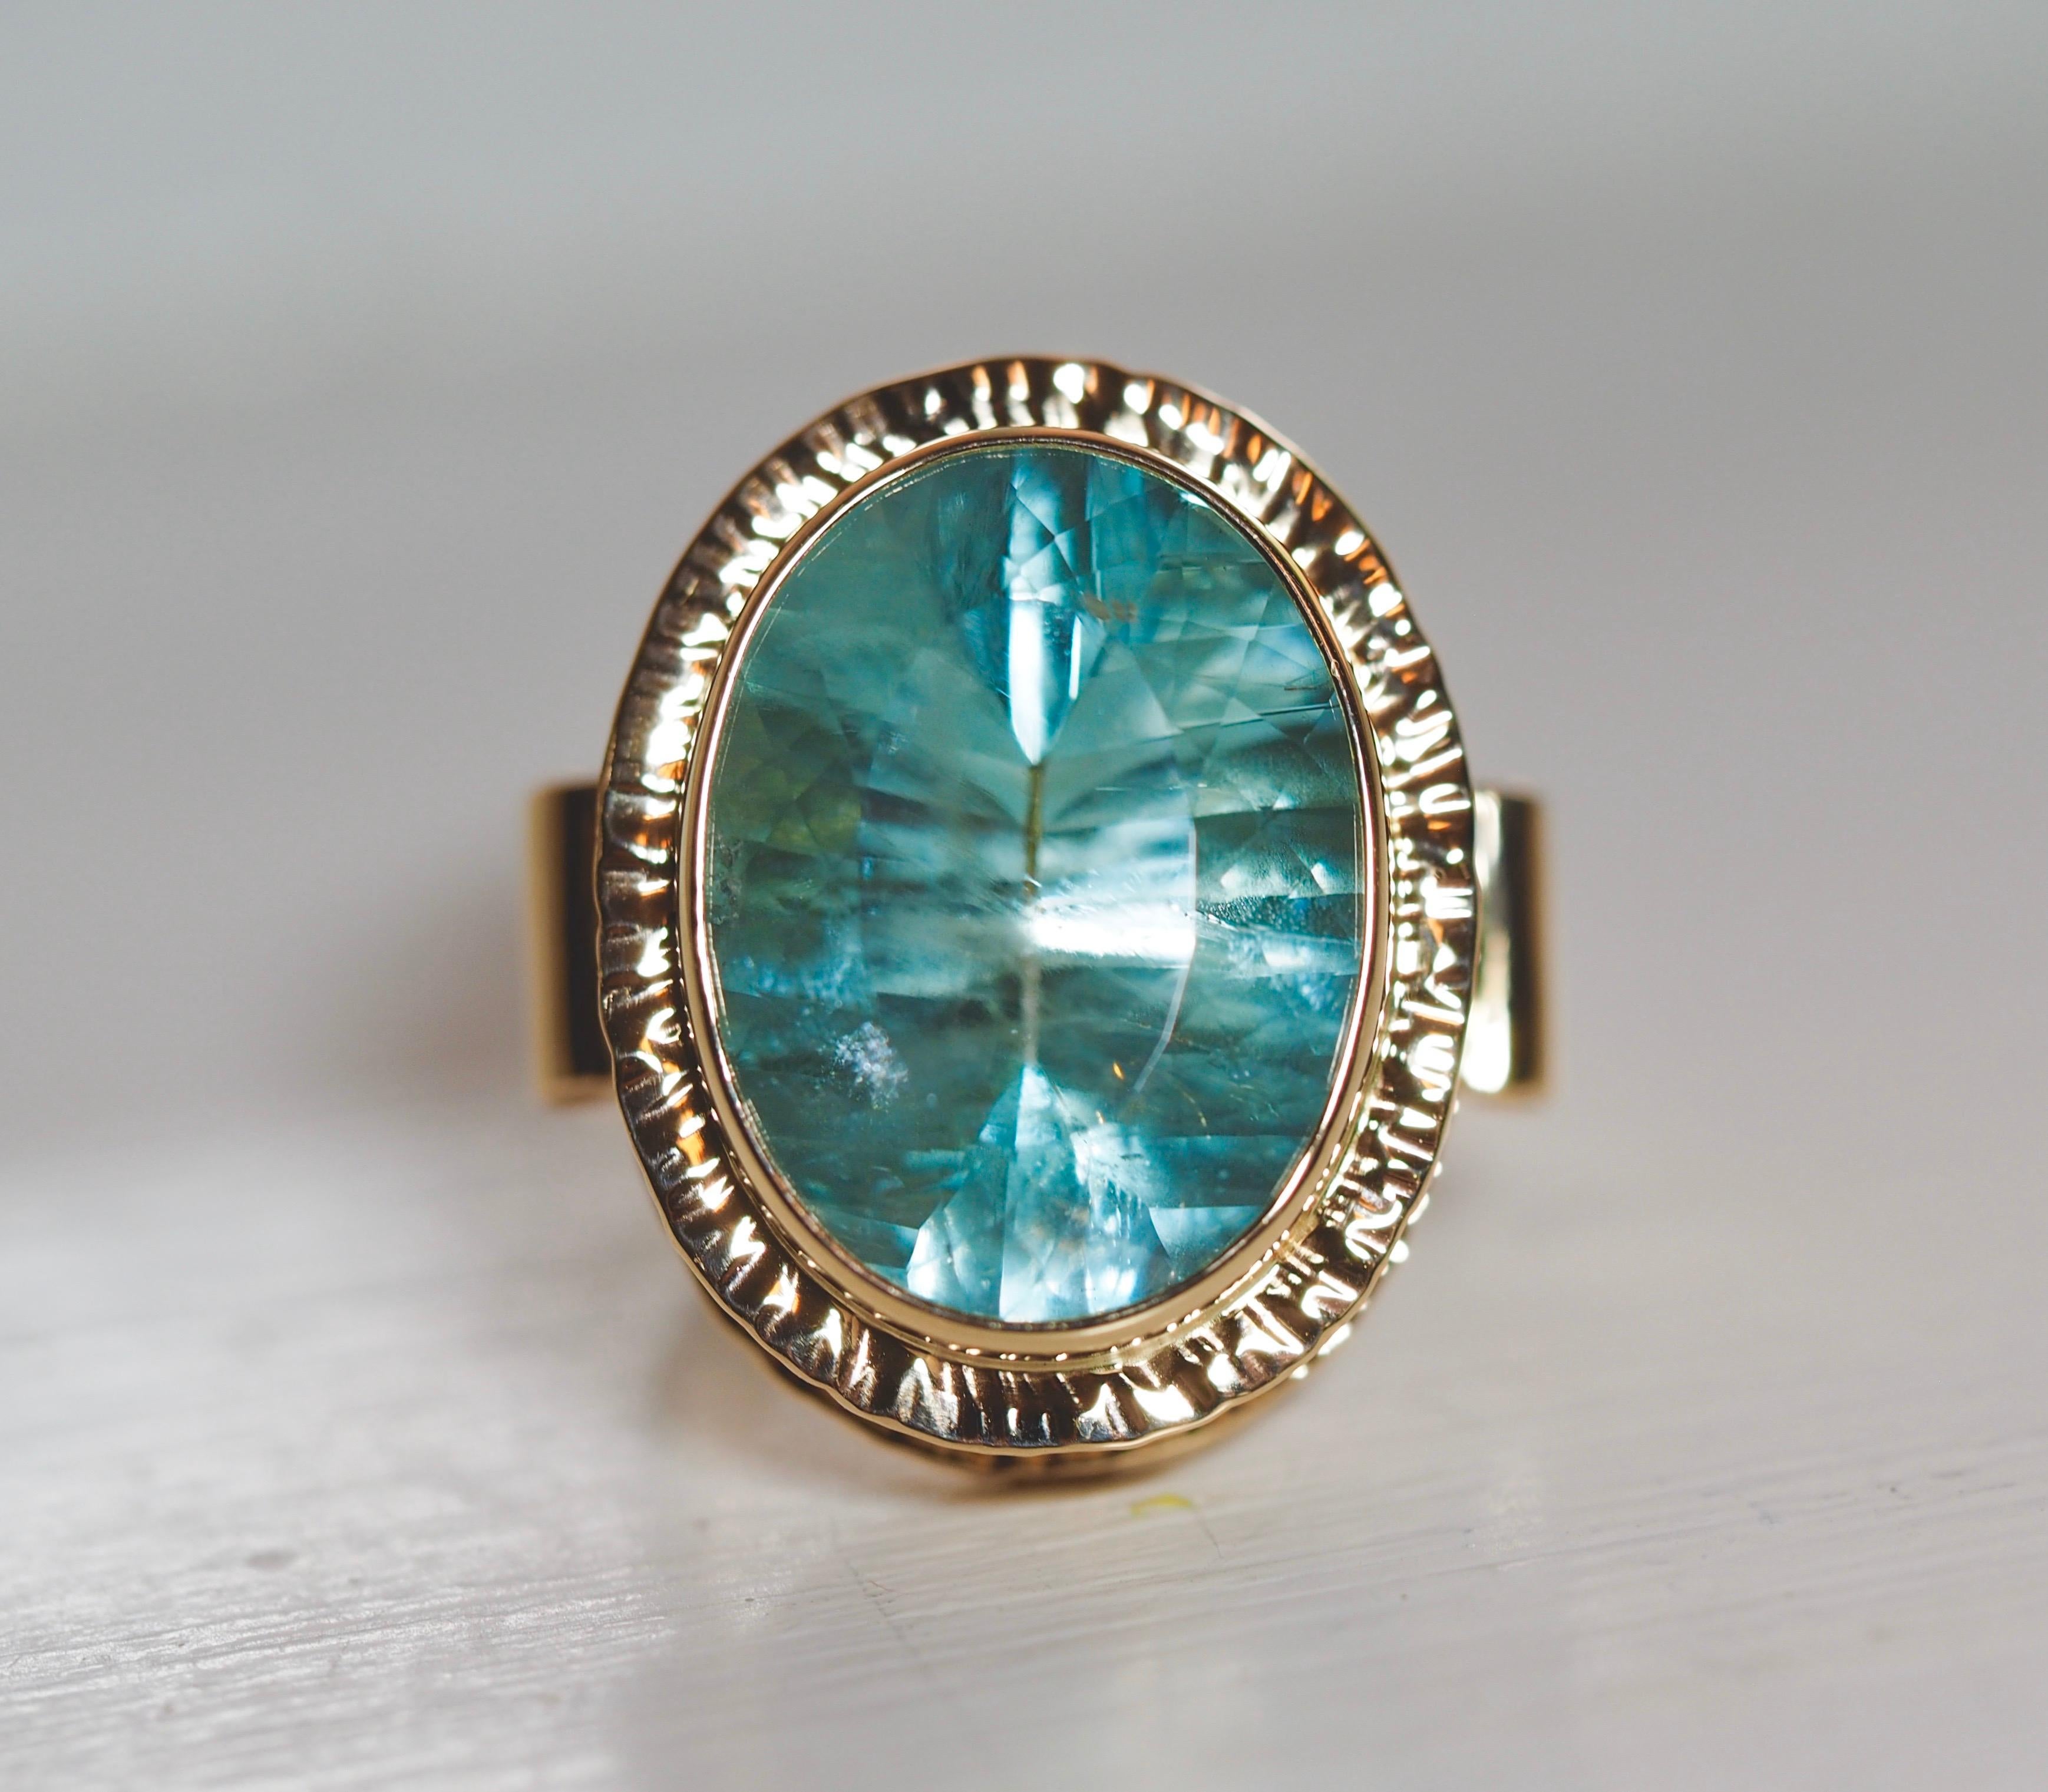 Michael Bakso 25.56 Carat Blue Topaz Statement Ring in Yellow Gold In Excellent Condition For Sale In Addison, TX